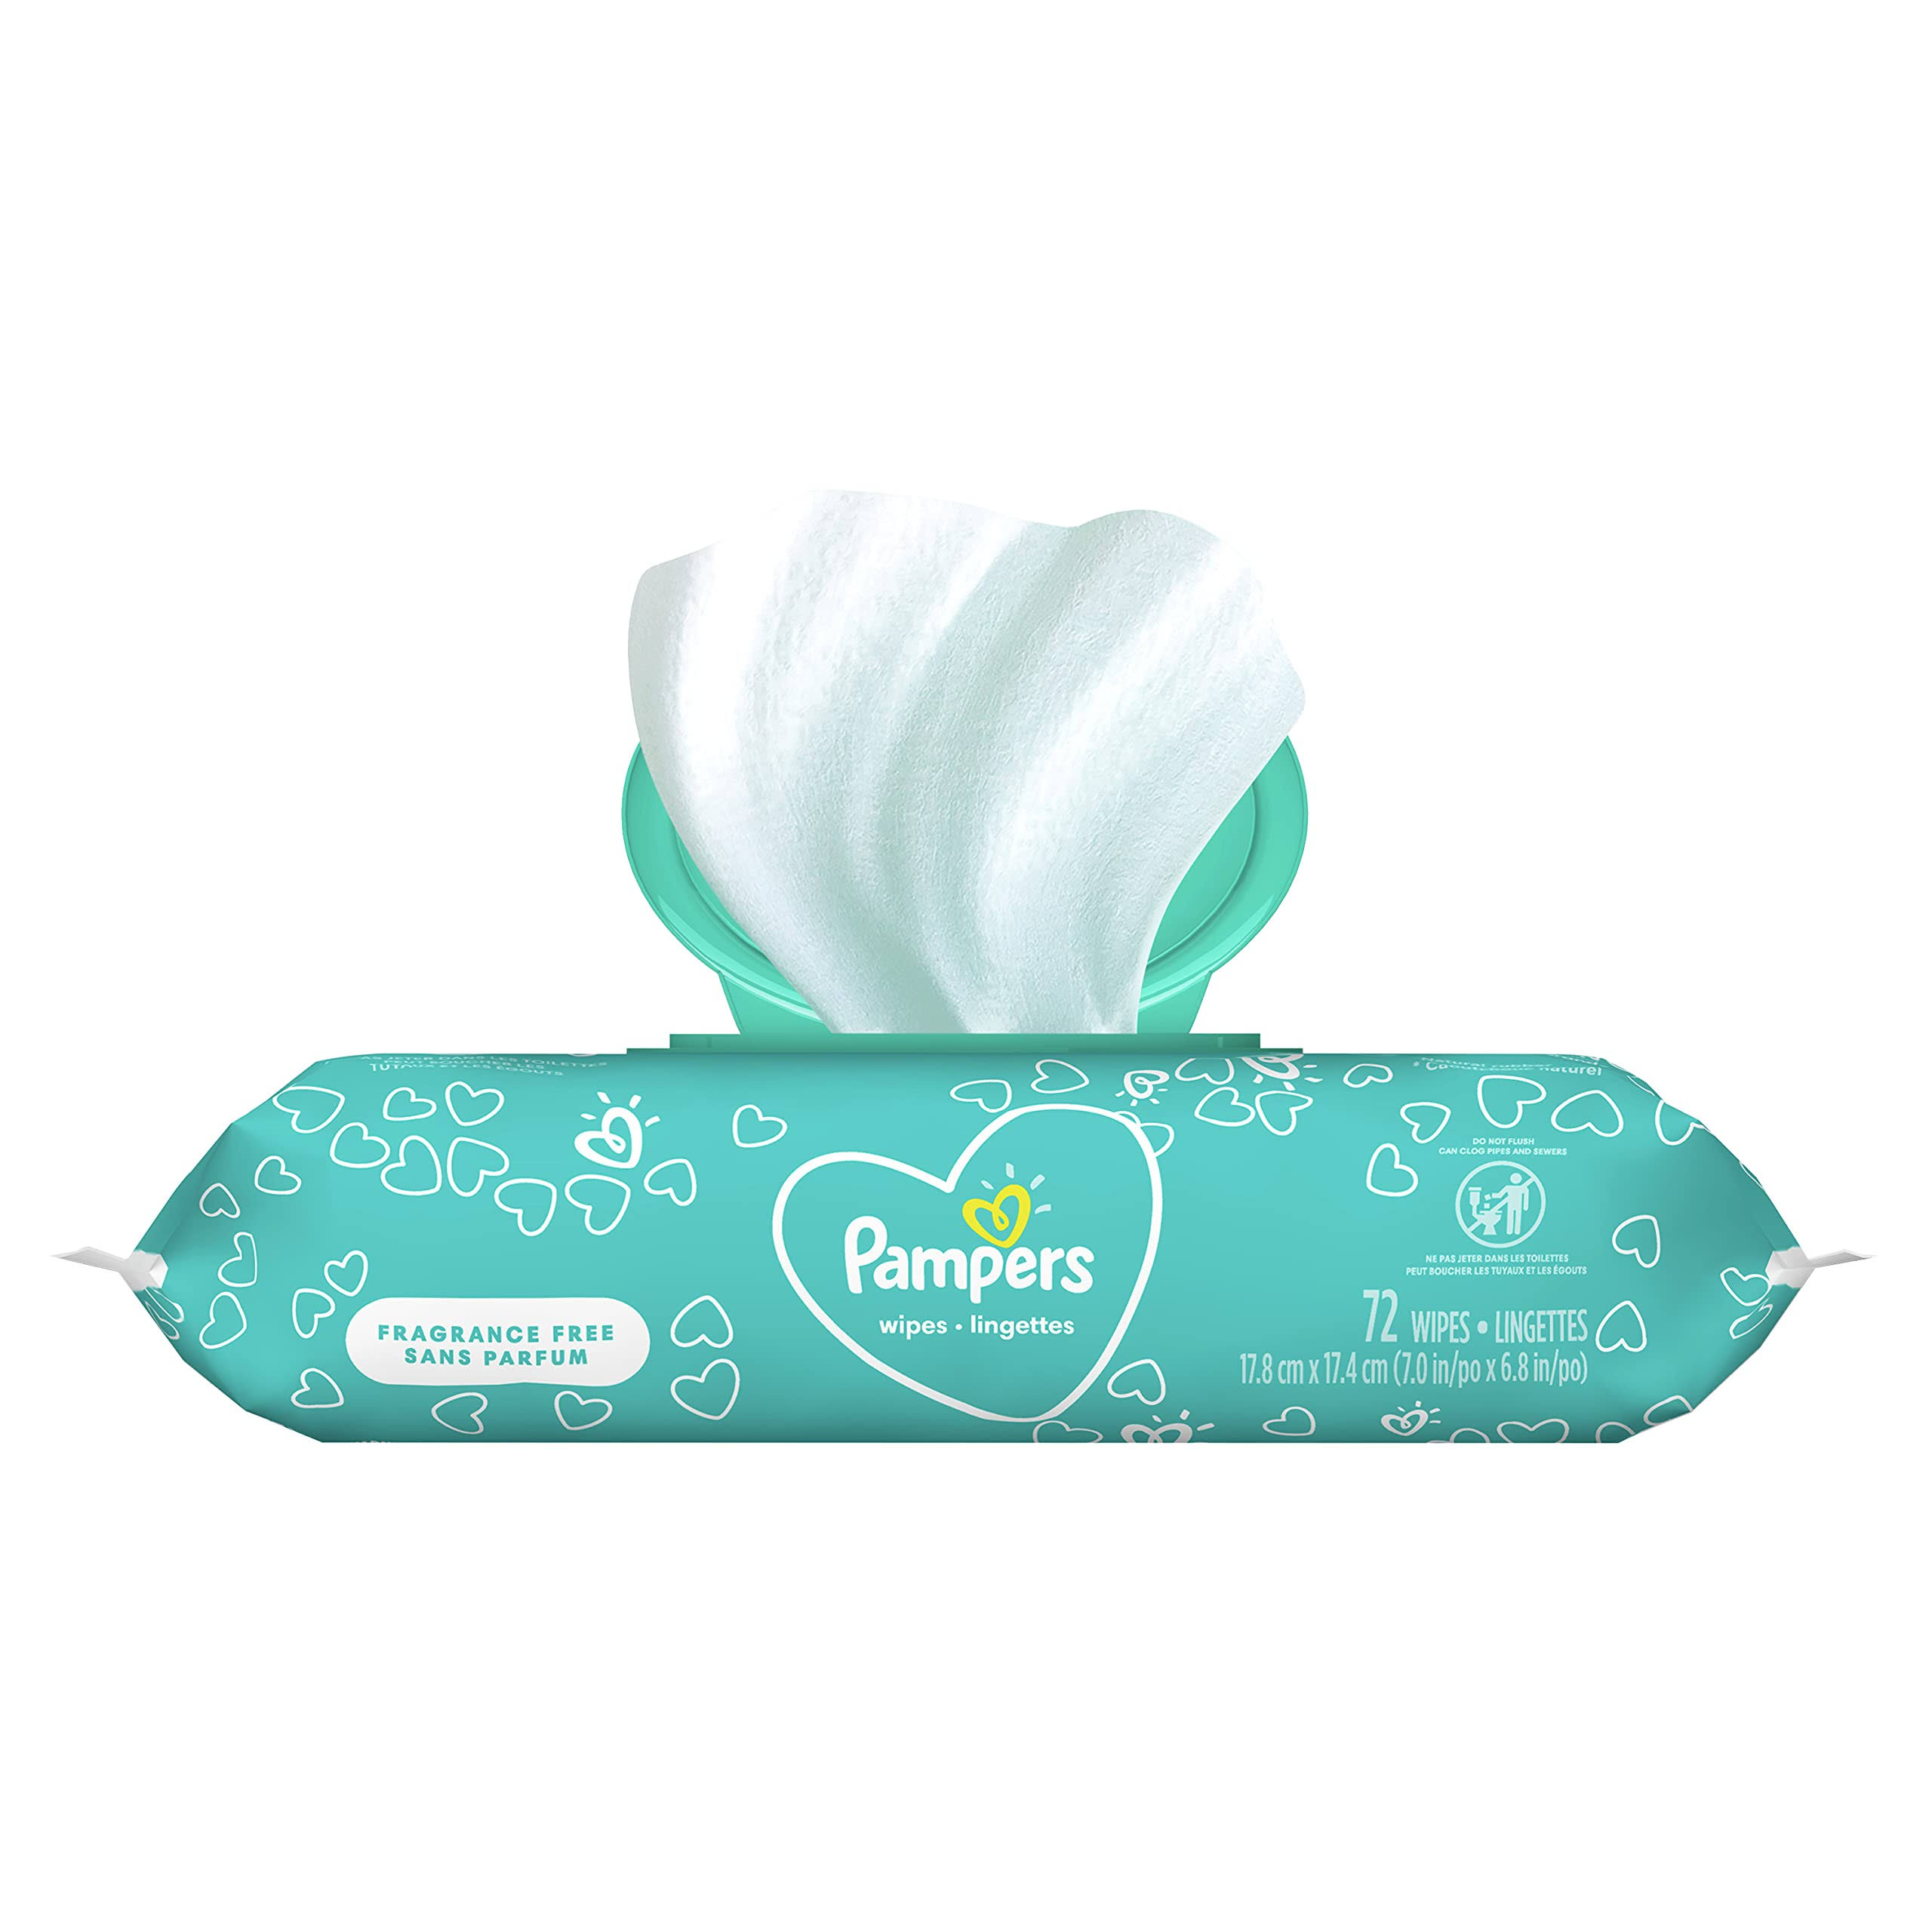 Pampers Complete Clean Baby Wipes - Unscented, 72 Wipes